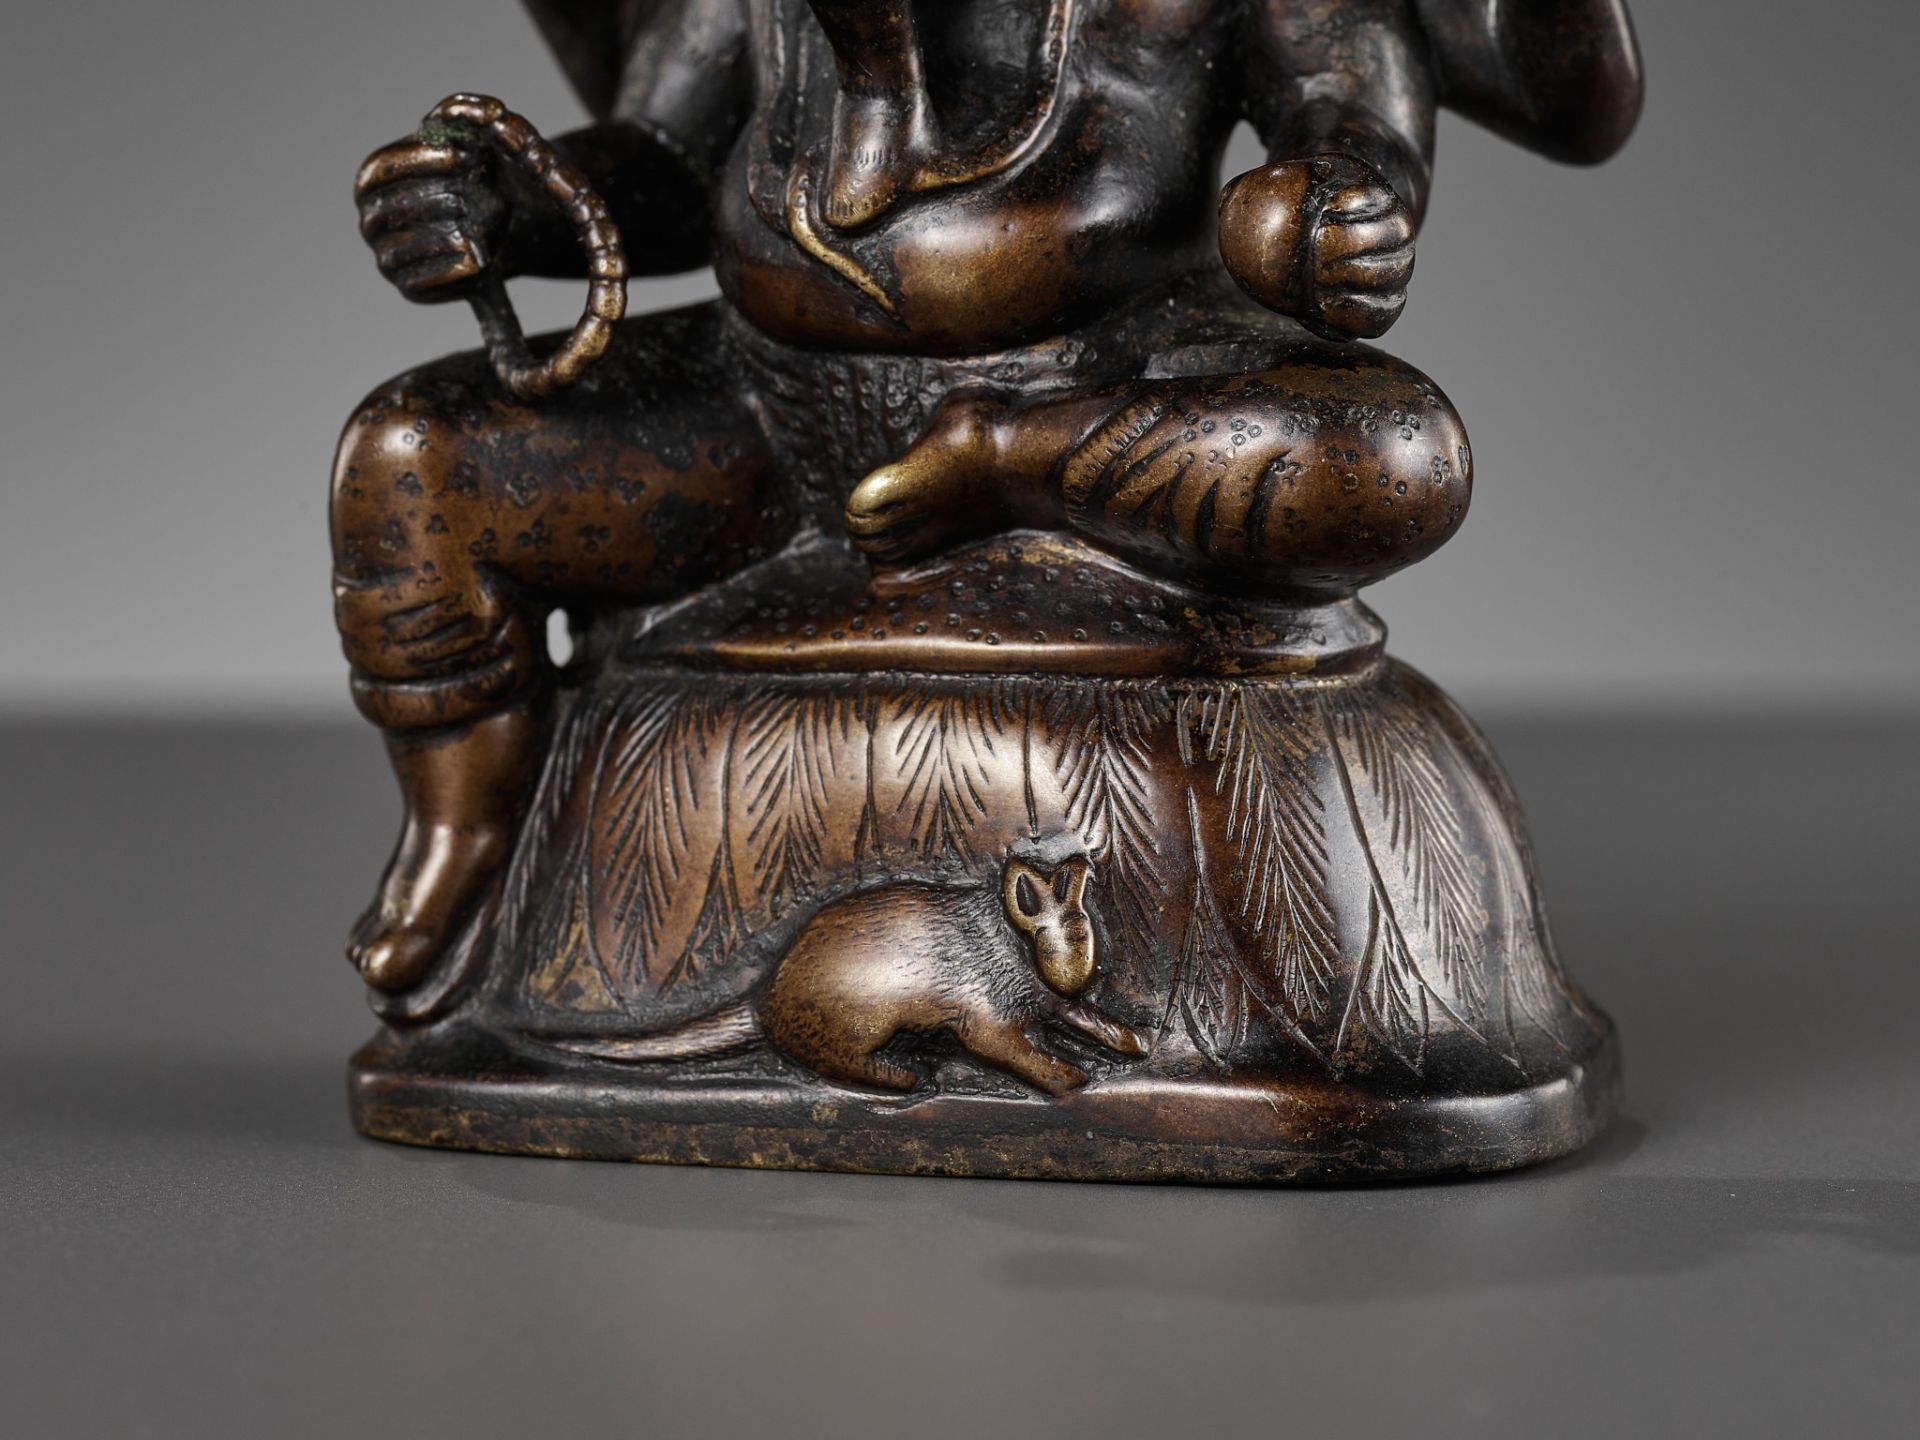 A SMALL BRONZE FIGURE OF GANESHA, SOUTH INDIA, 17TH - 18TH CENTURY - Image 2 of 14